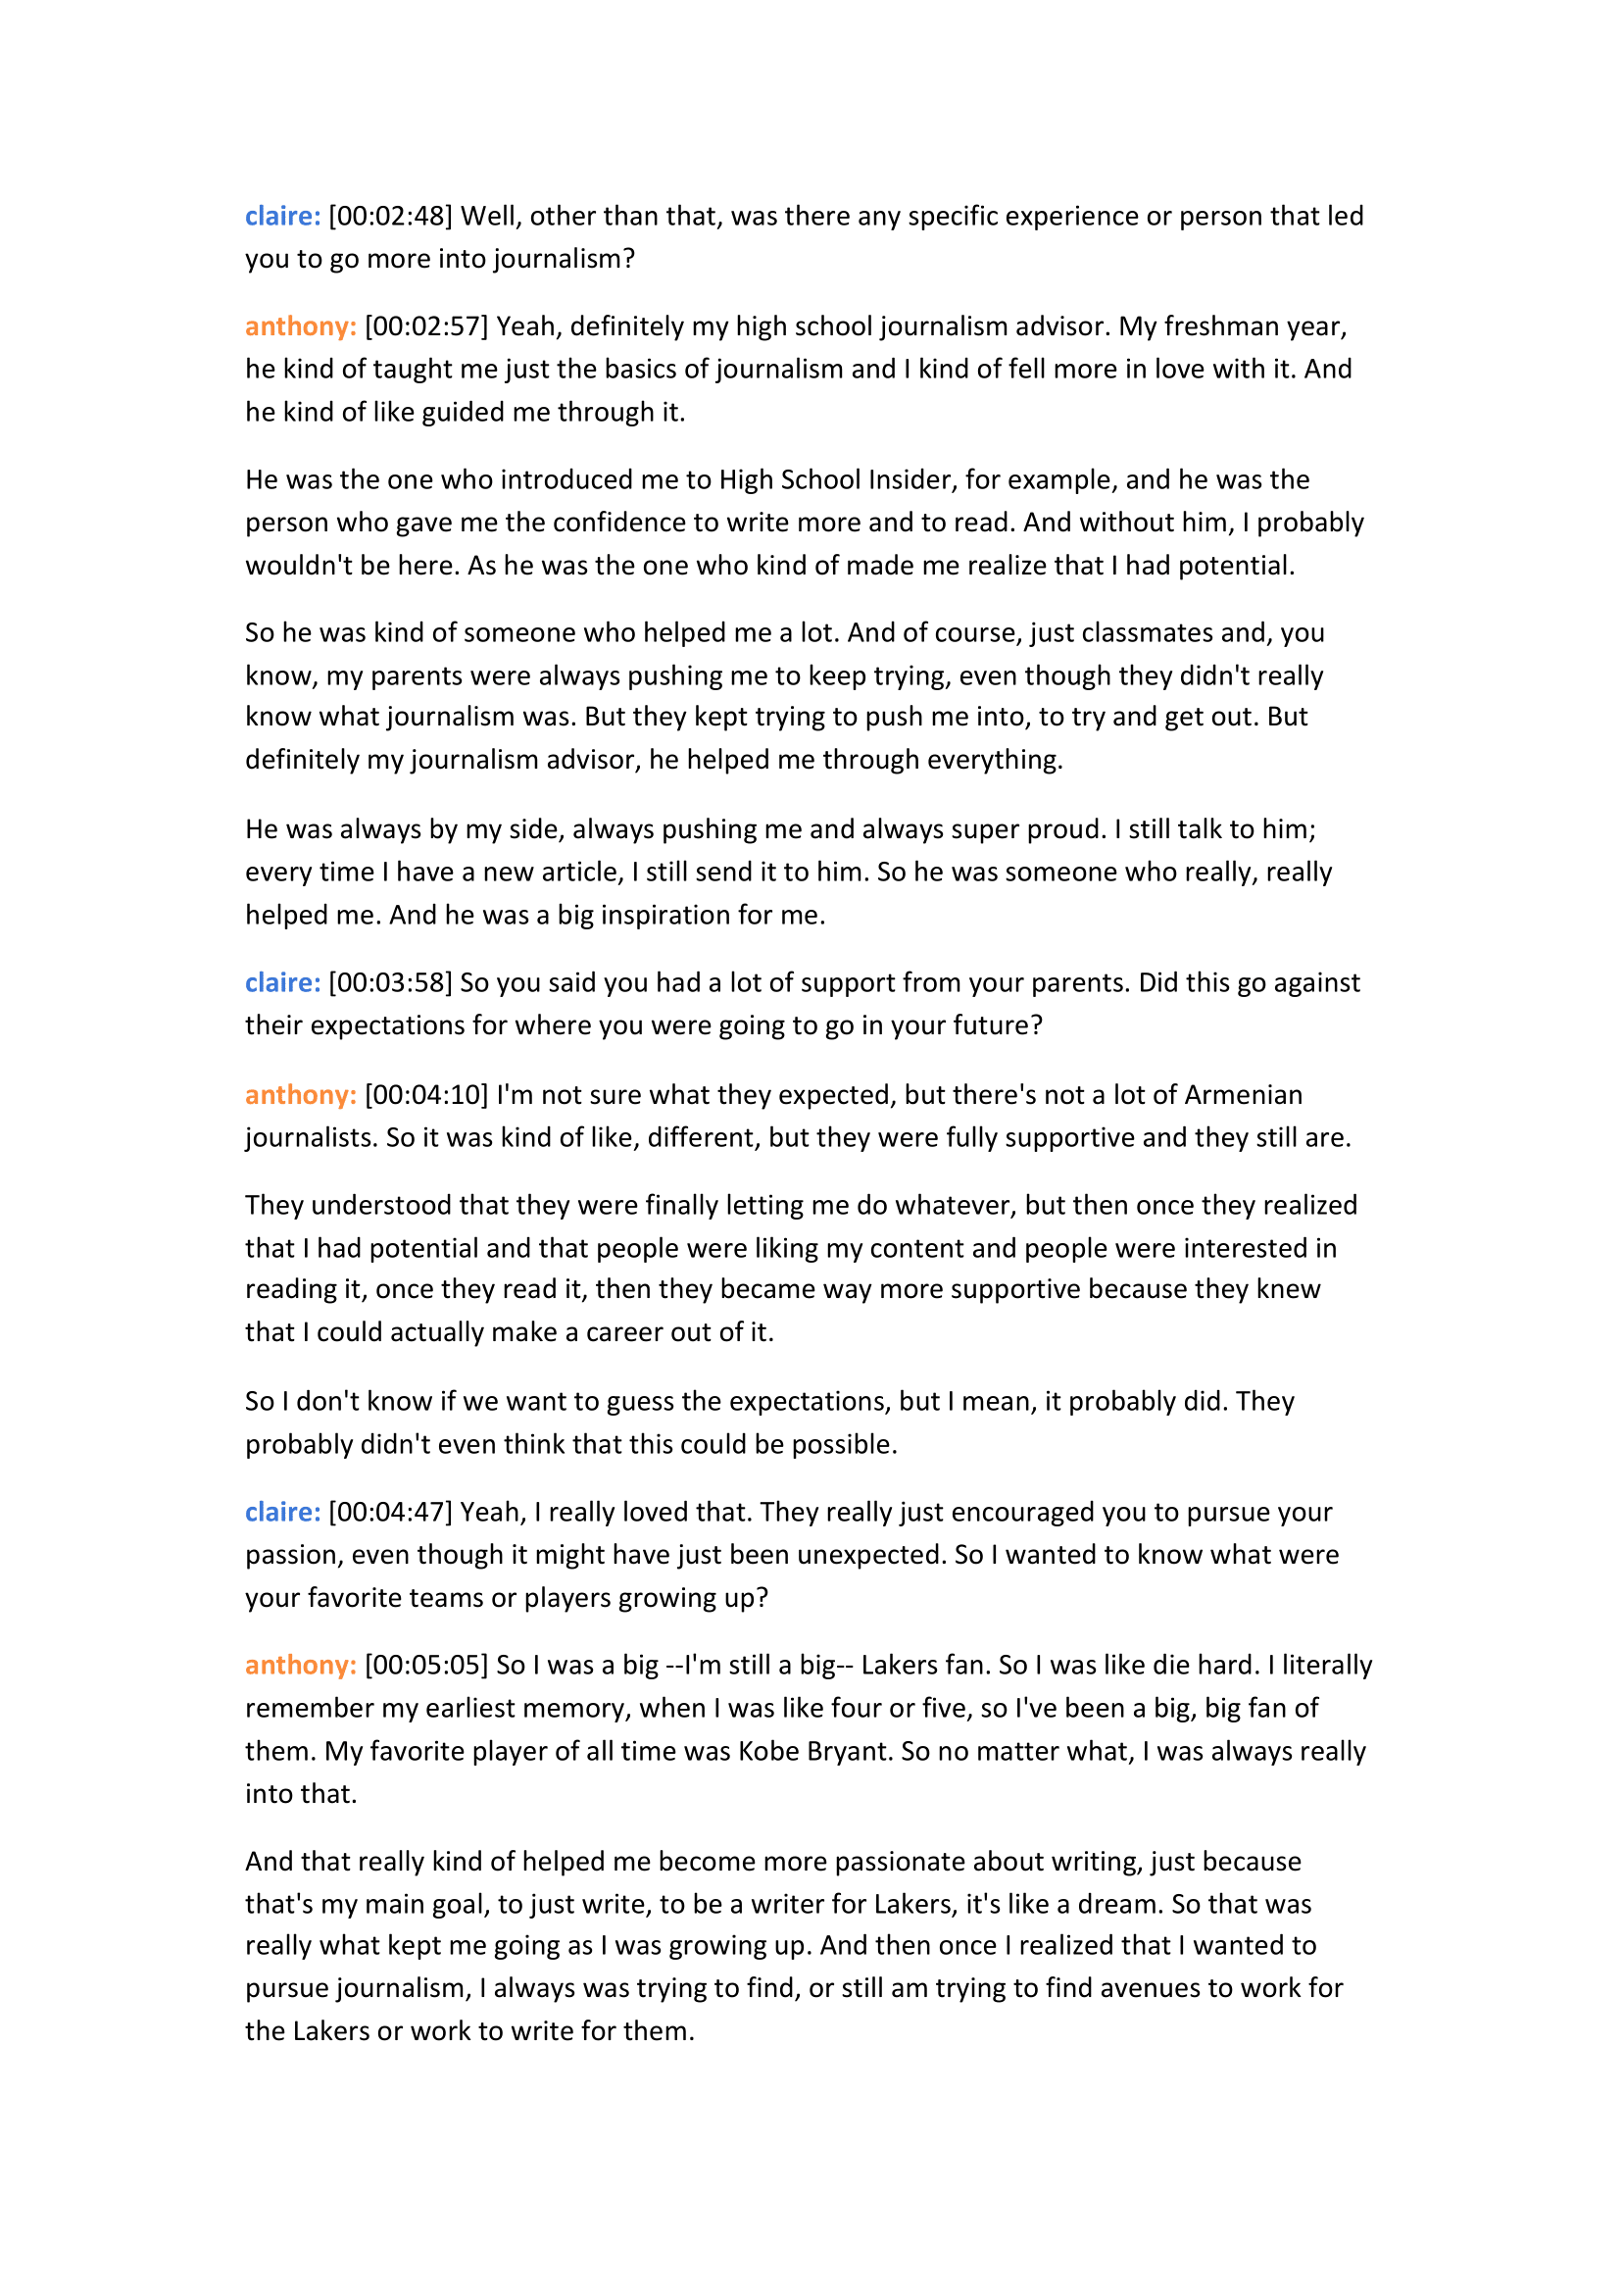 Uplift All Voices Ep 10 Transcript-2.png